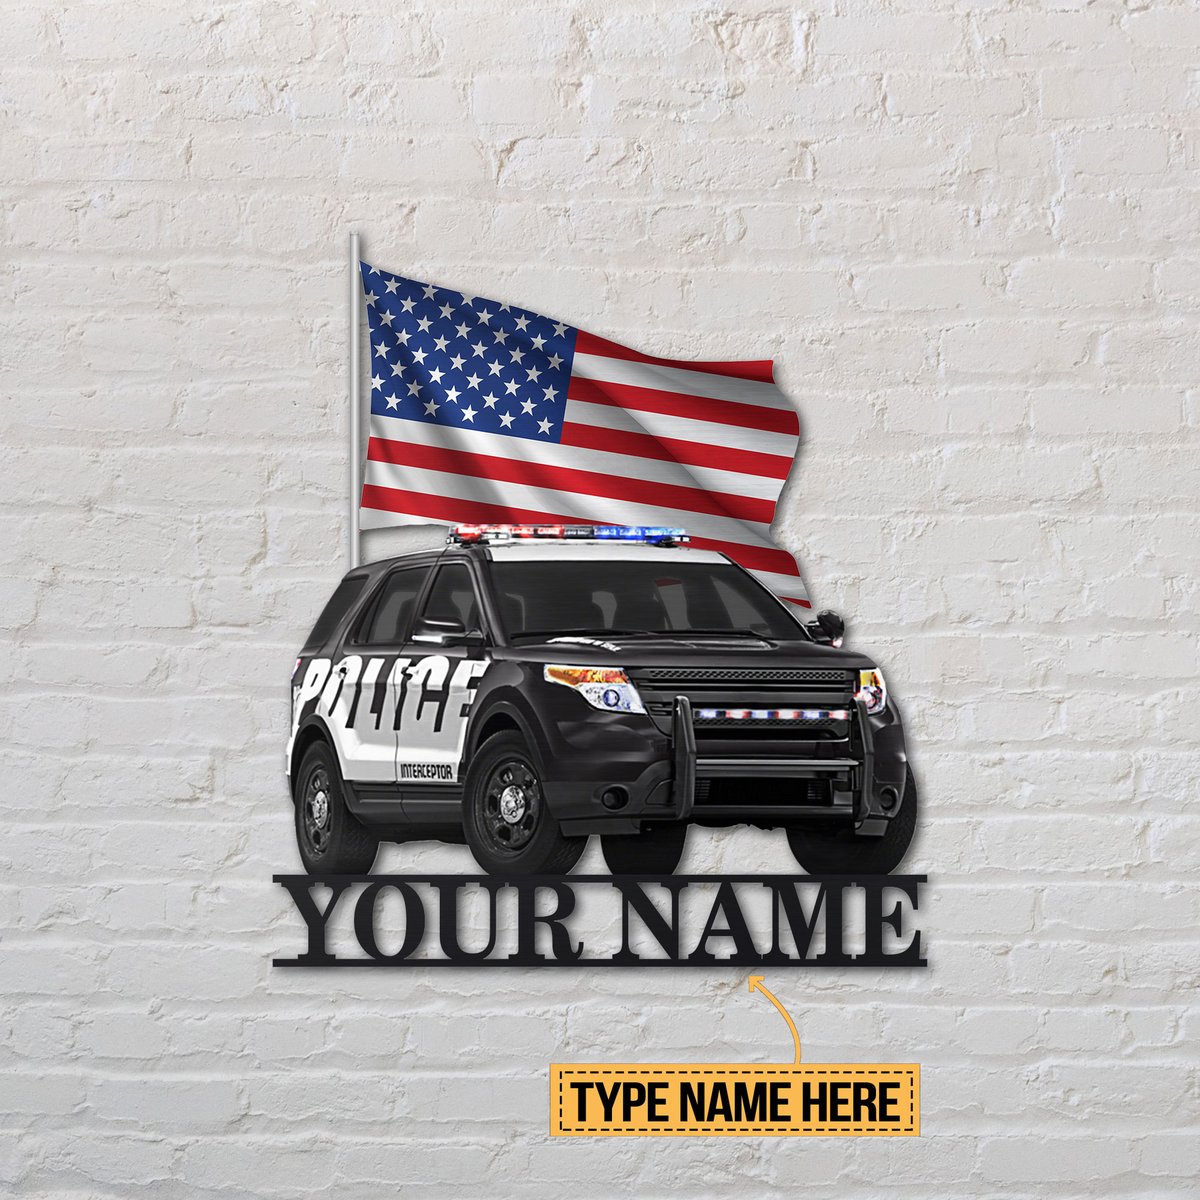 SUV Police American flag custom personalized metal sign 11